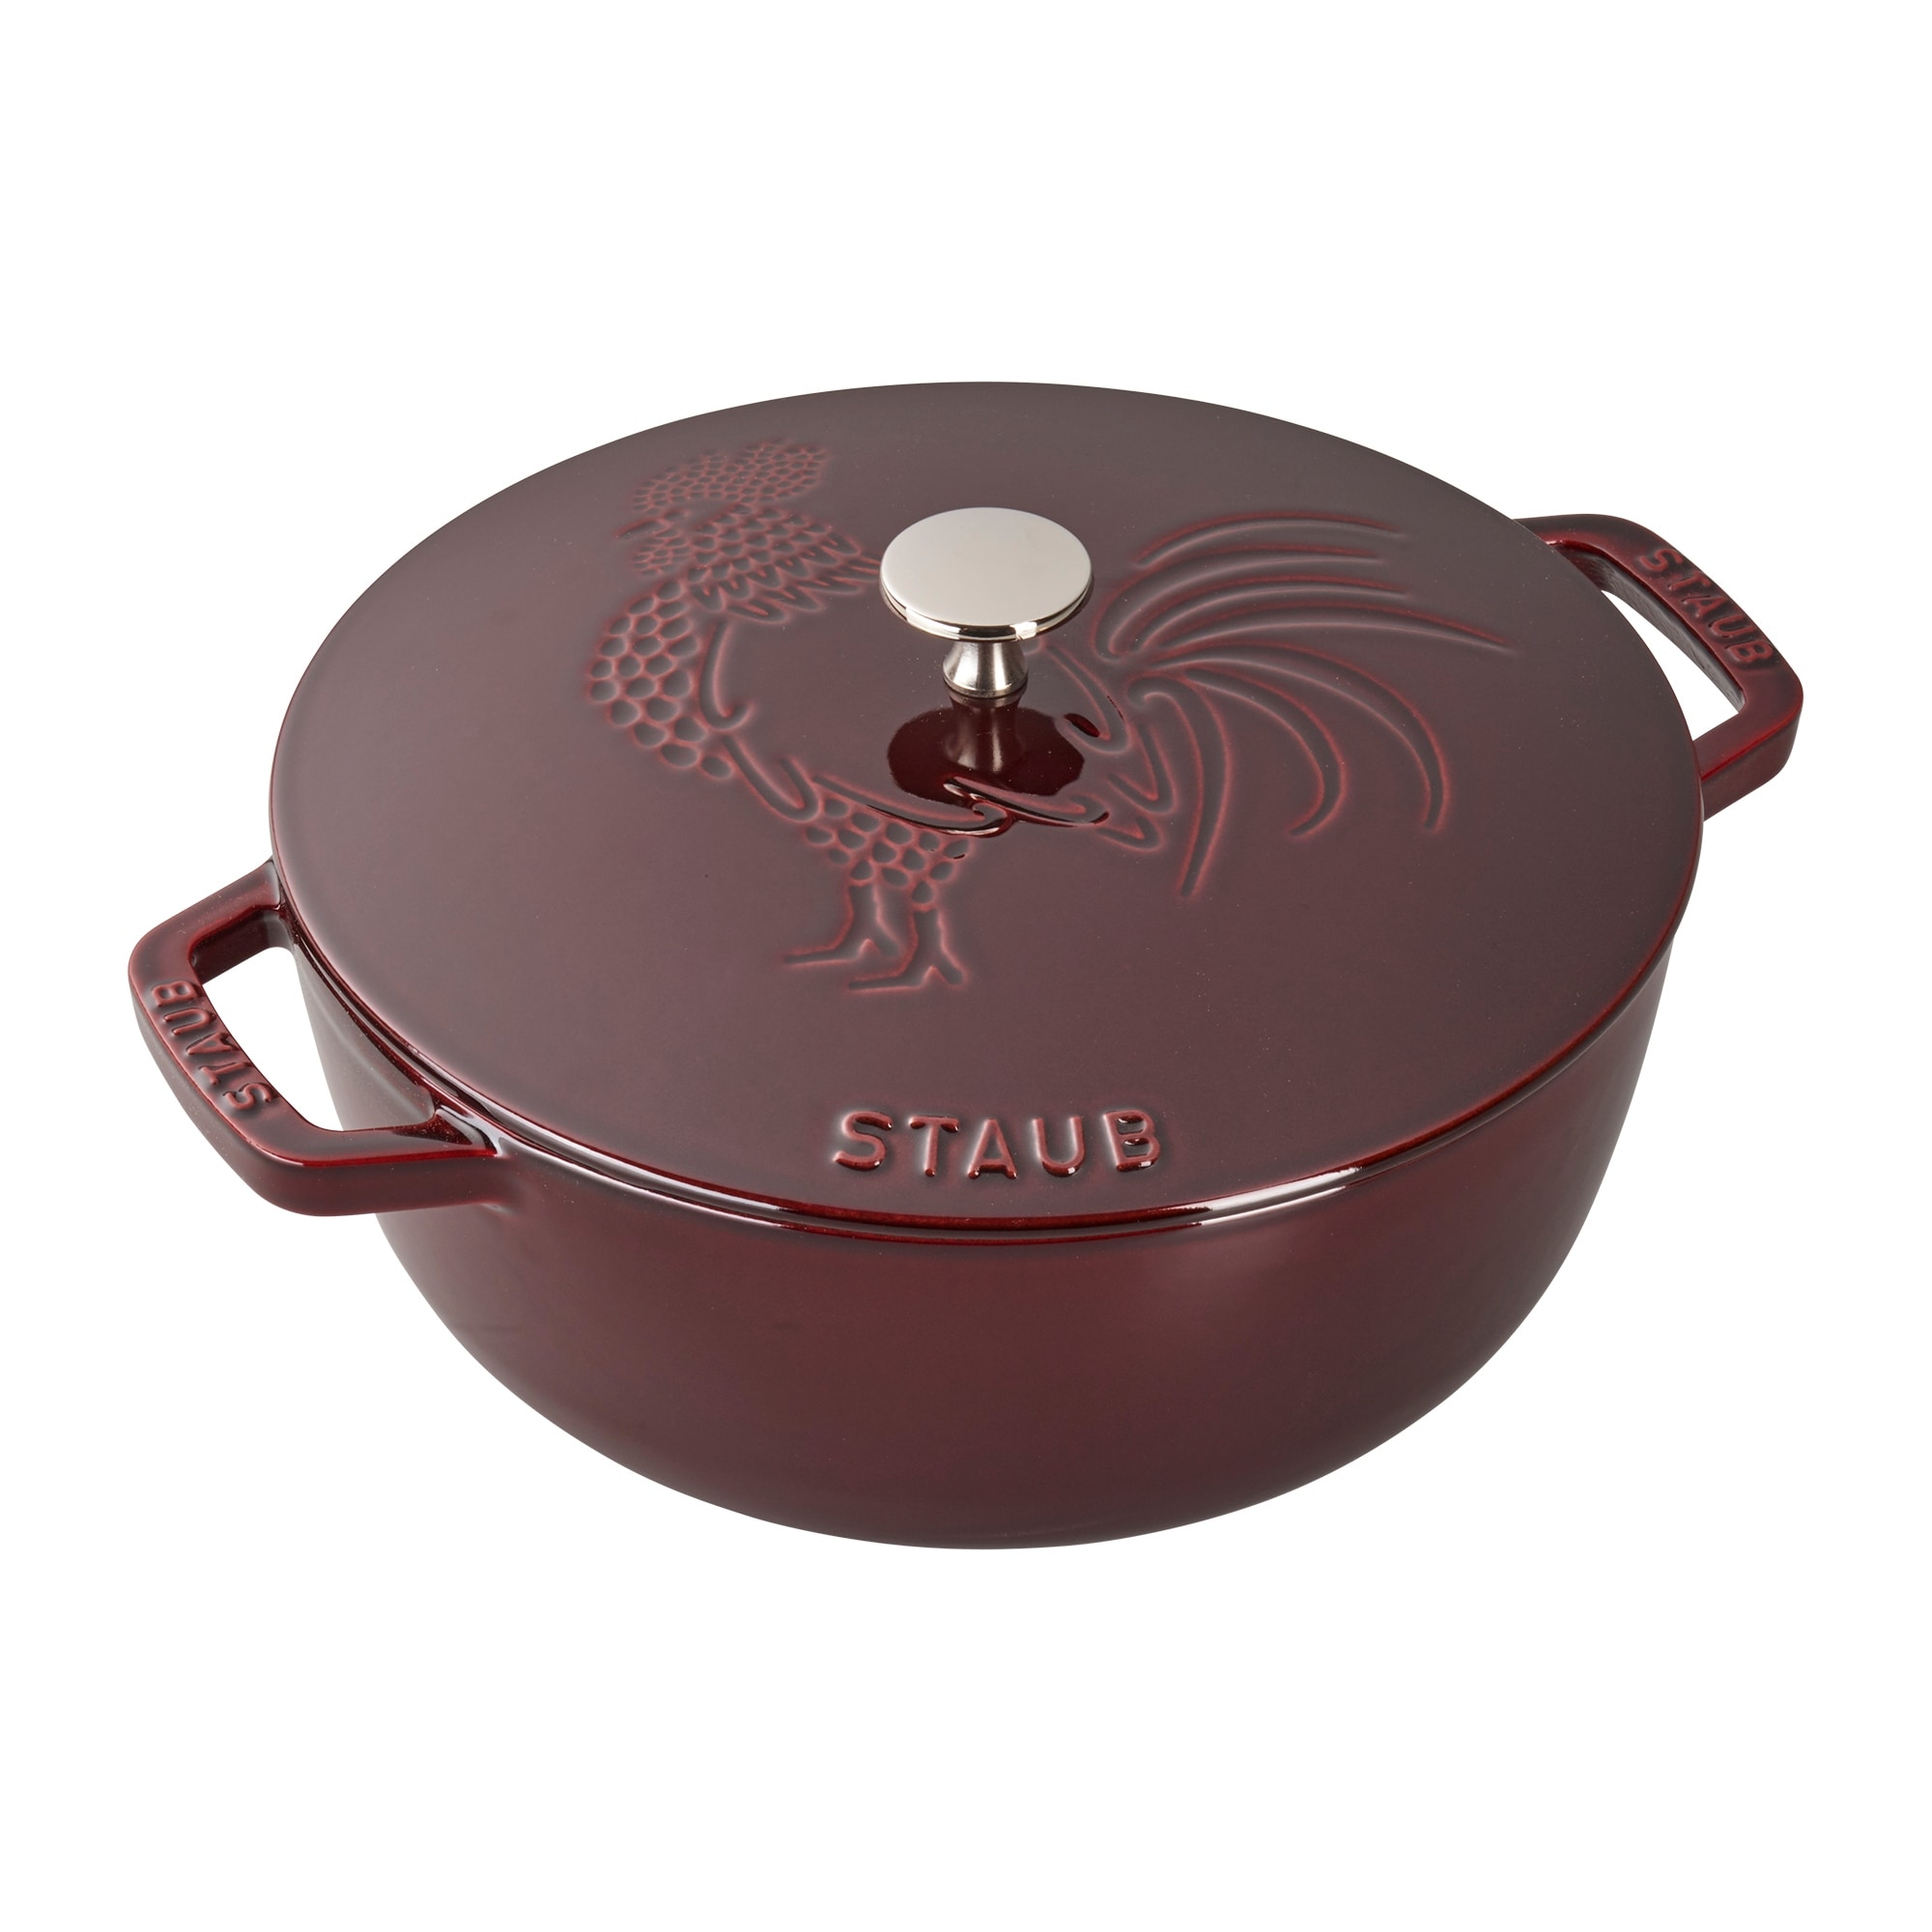 https://ak1.ostkcdn.com/images/products/is/images/direct/9ded7f65af3f5d466a4d6457f1e5f434320e8bbb/Staub-Cast-Iron-3.75-qt-Essential-French-Oven-Rooster.jpg